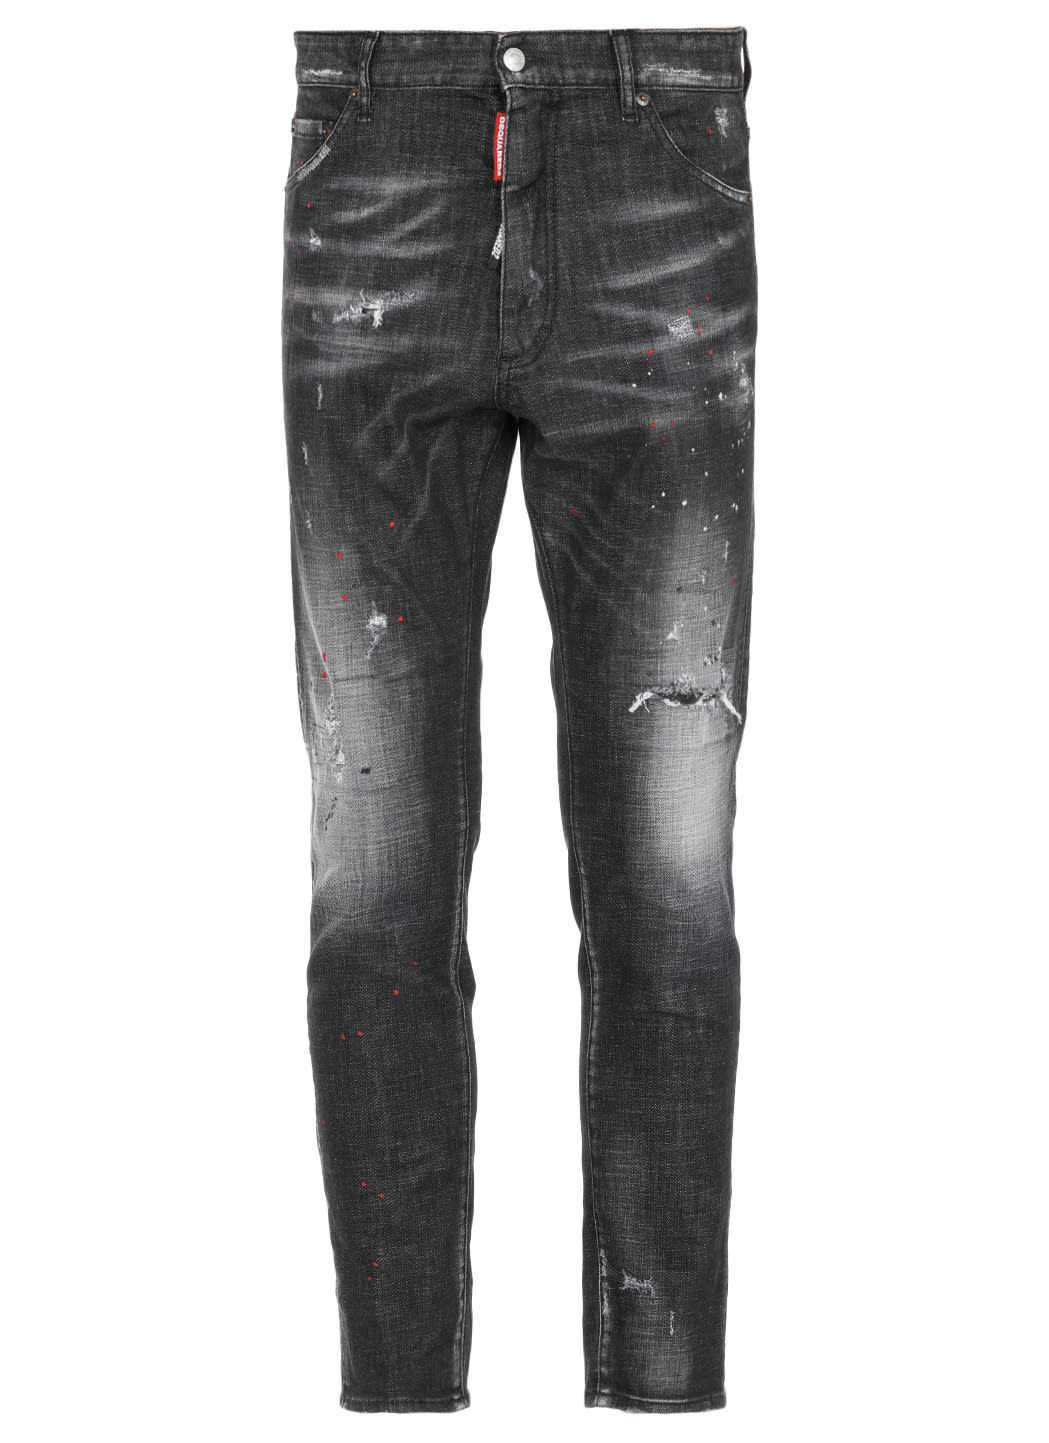 DSQUARED2 COOL GUY JEANS,S74LB0876 S30357900